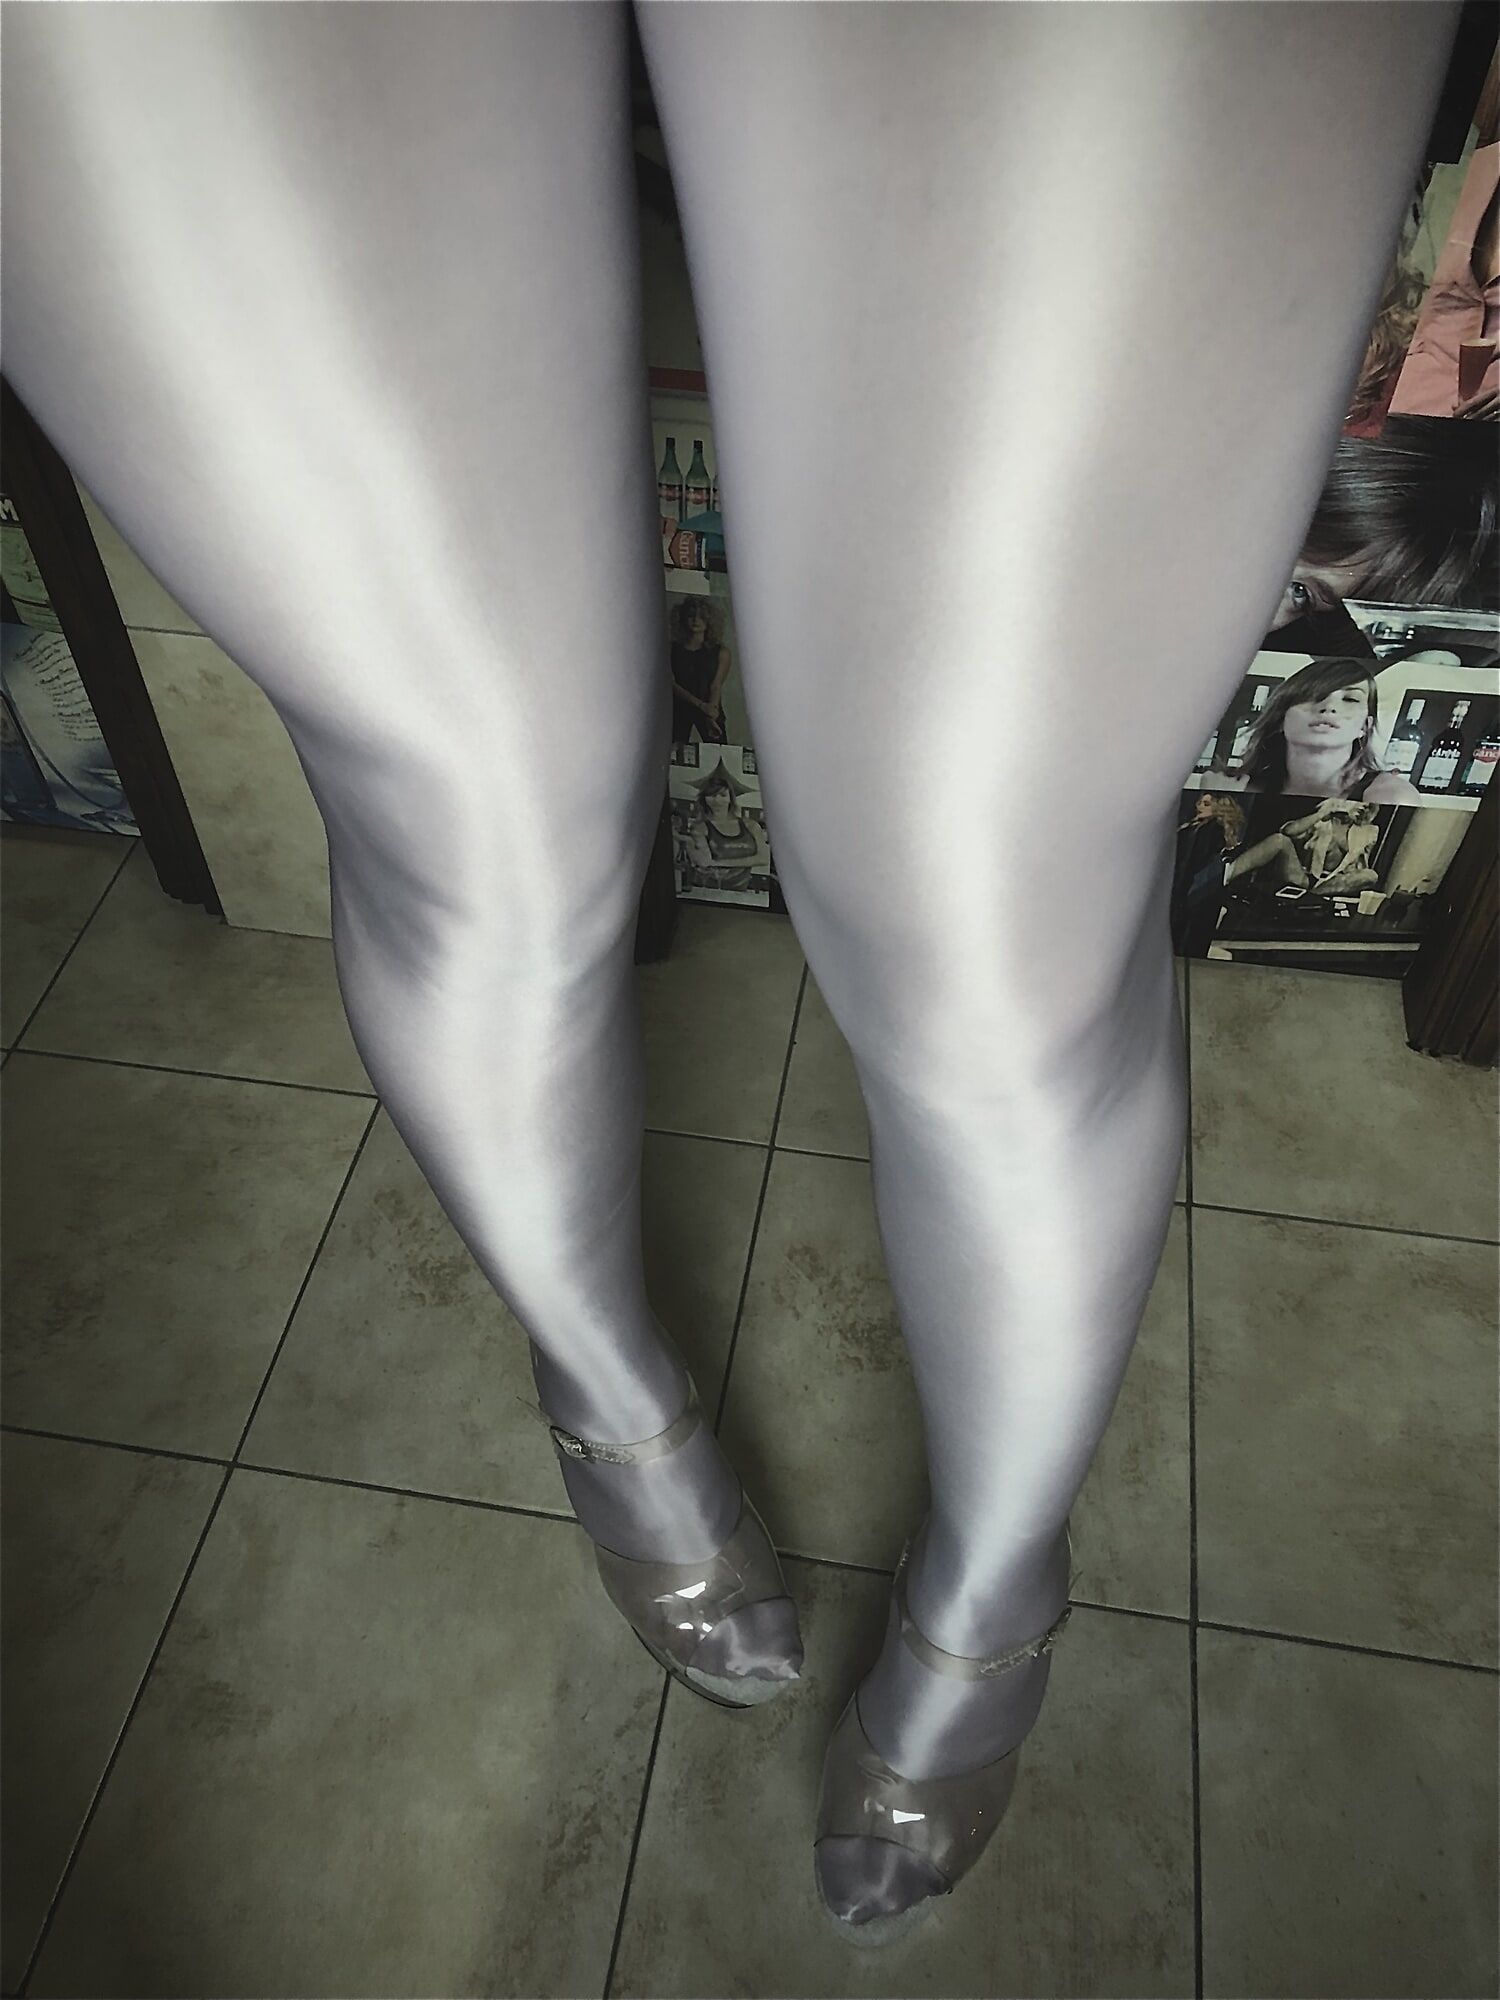 Moments of shiny legs, glossy tights and high heels, #8